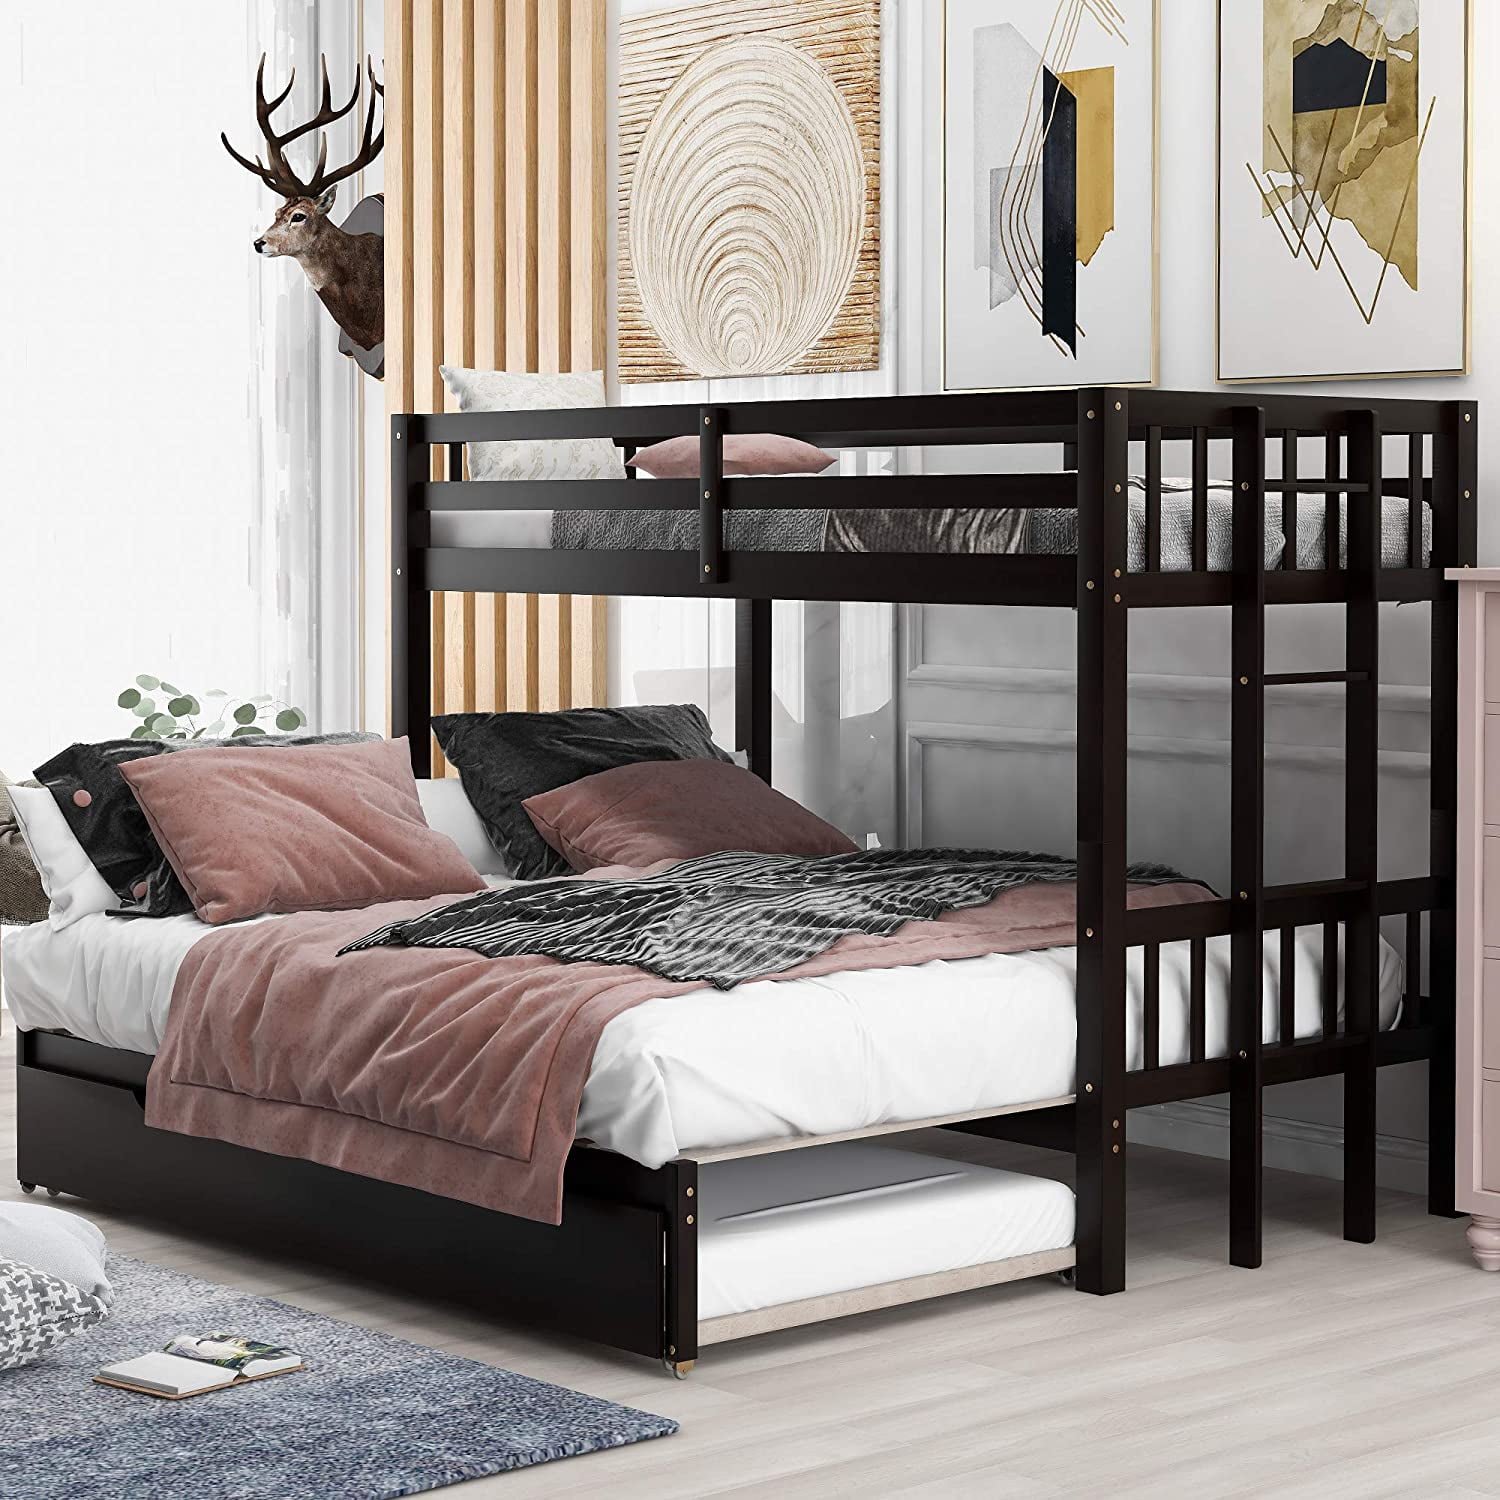 Trundle Wooden Bunk Bed Frame, Bunk Bed With Mattress Set